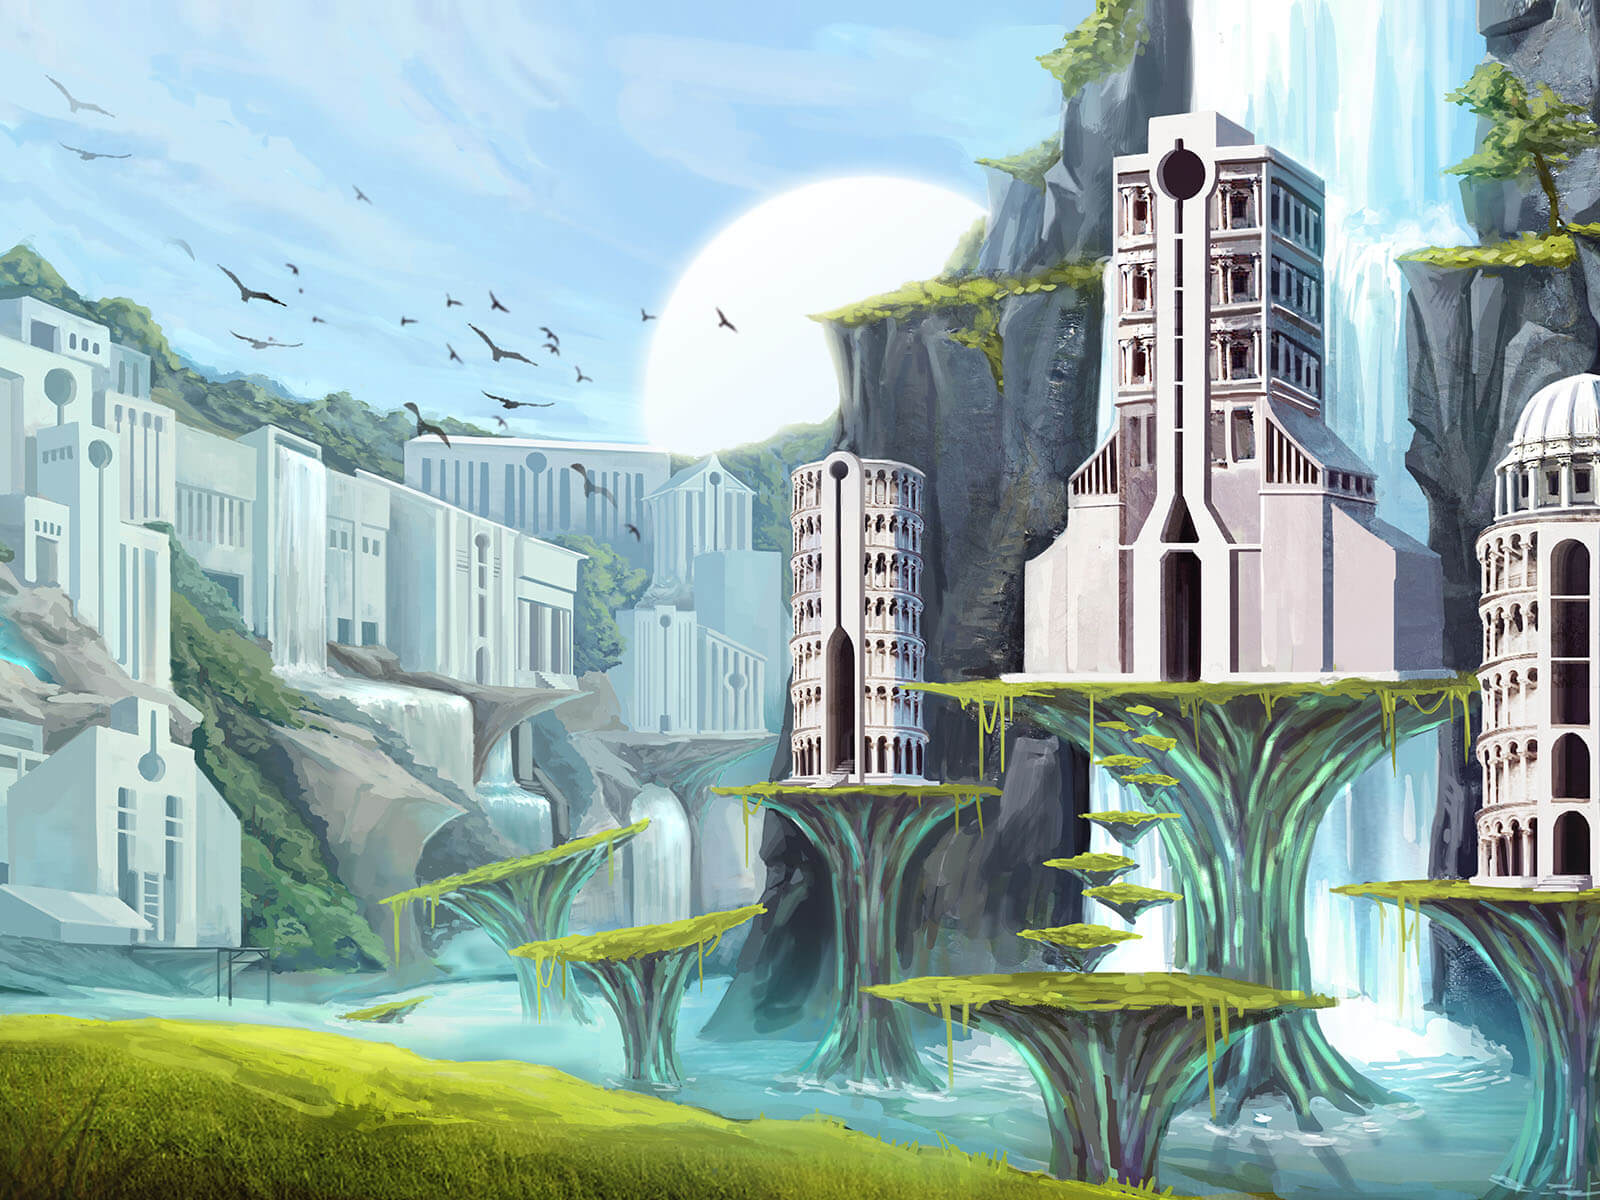 Futuristic Romanesque structures in an alien landscape by a waterfall.